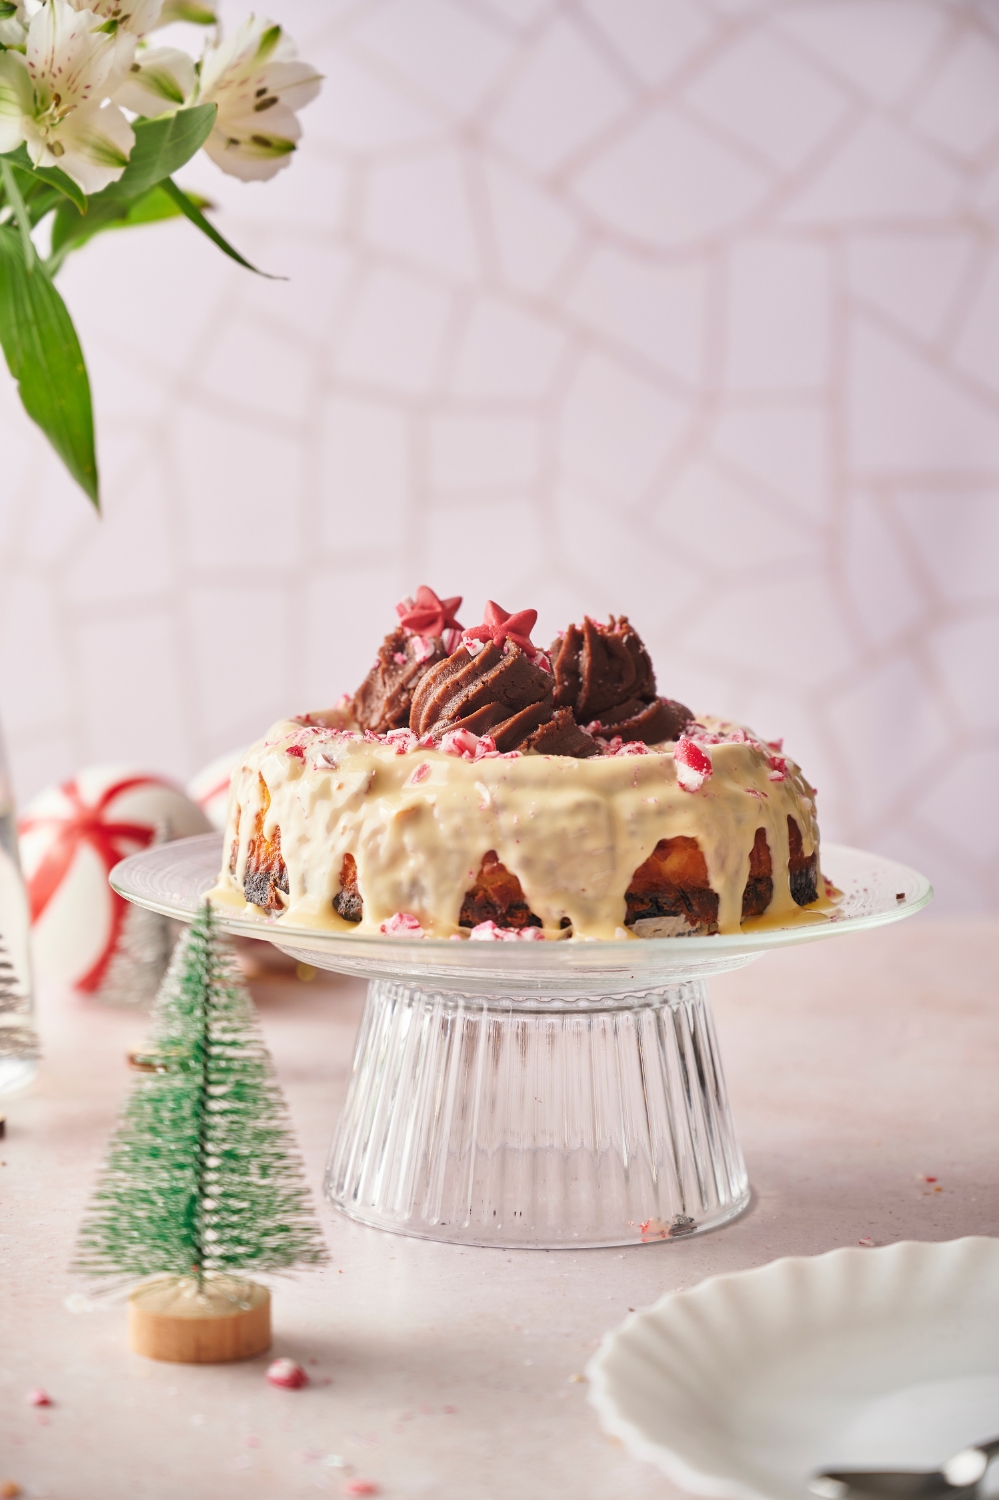 Peppermint cheesecake topped with white frosting, mounds of chocolate frosting, crushed candy canes, and star sprinkles. The cheesecake is on a clear cake stand.